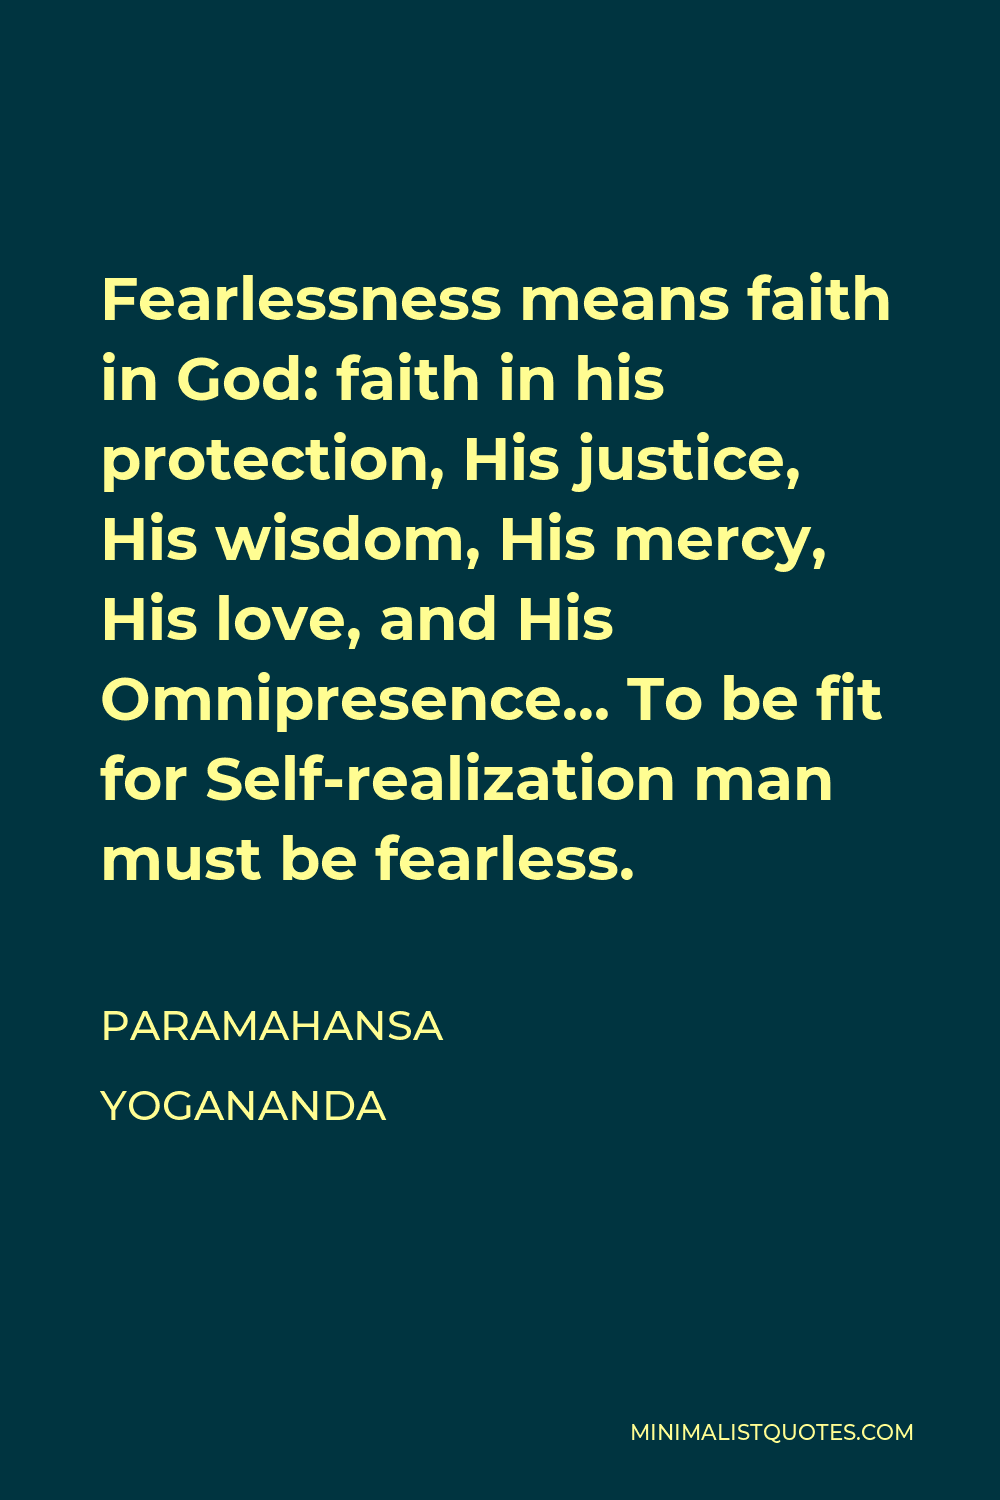 Paramahansa Yogananda Quote - Fearlessness means faith in God: faith in his protection, His justice, His wisdom, His mercy, His love, and His Omnipresence… To be fit for Self-realization man must be fearless.